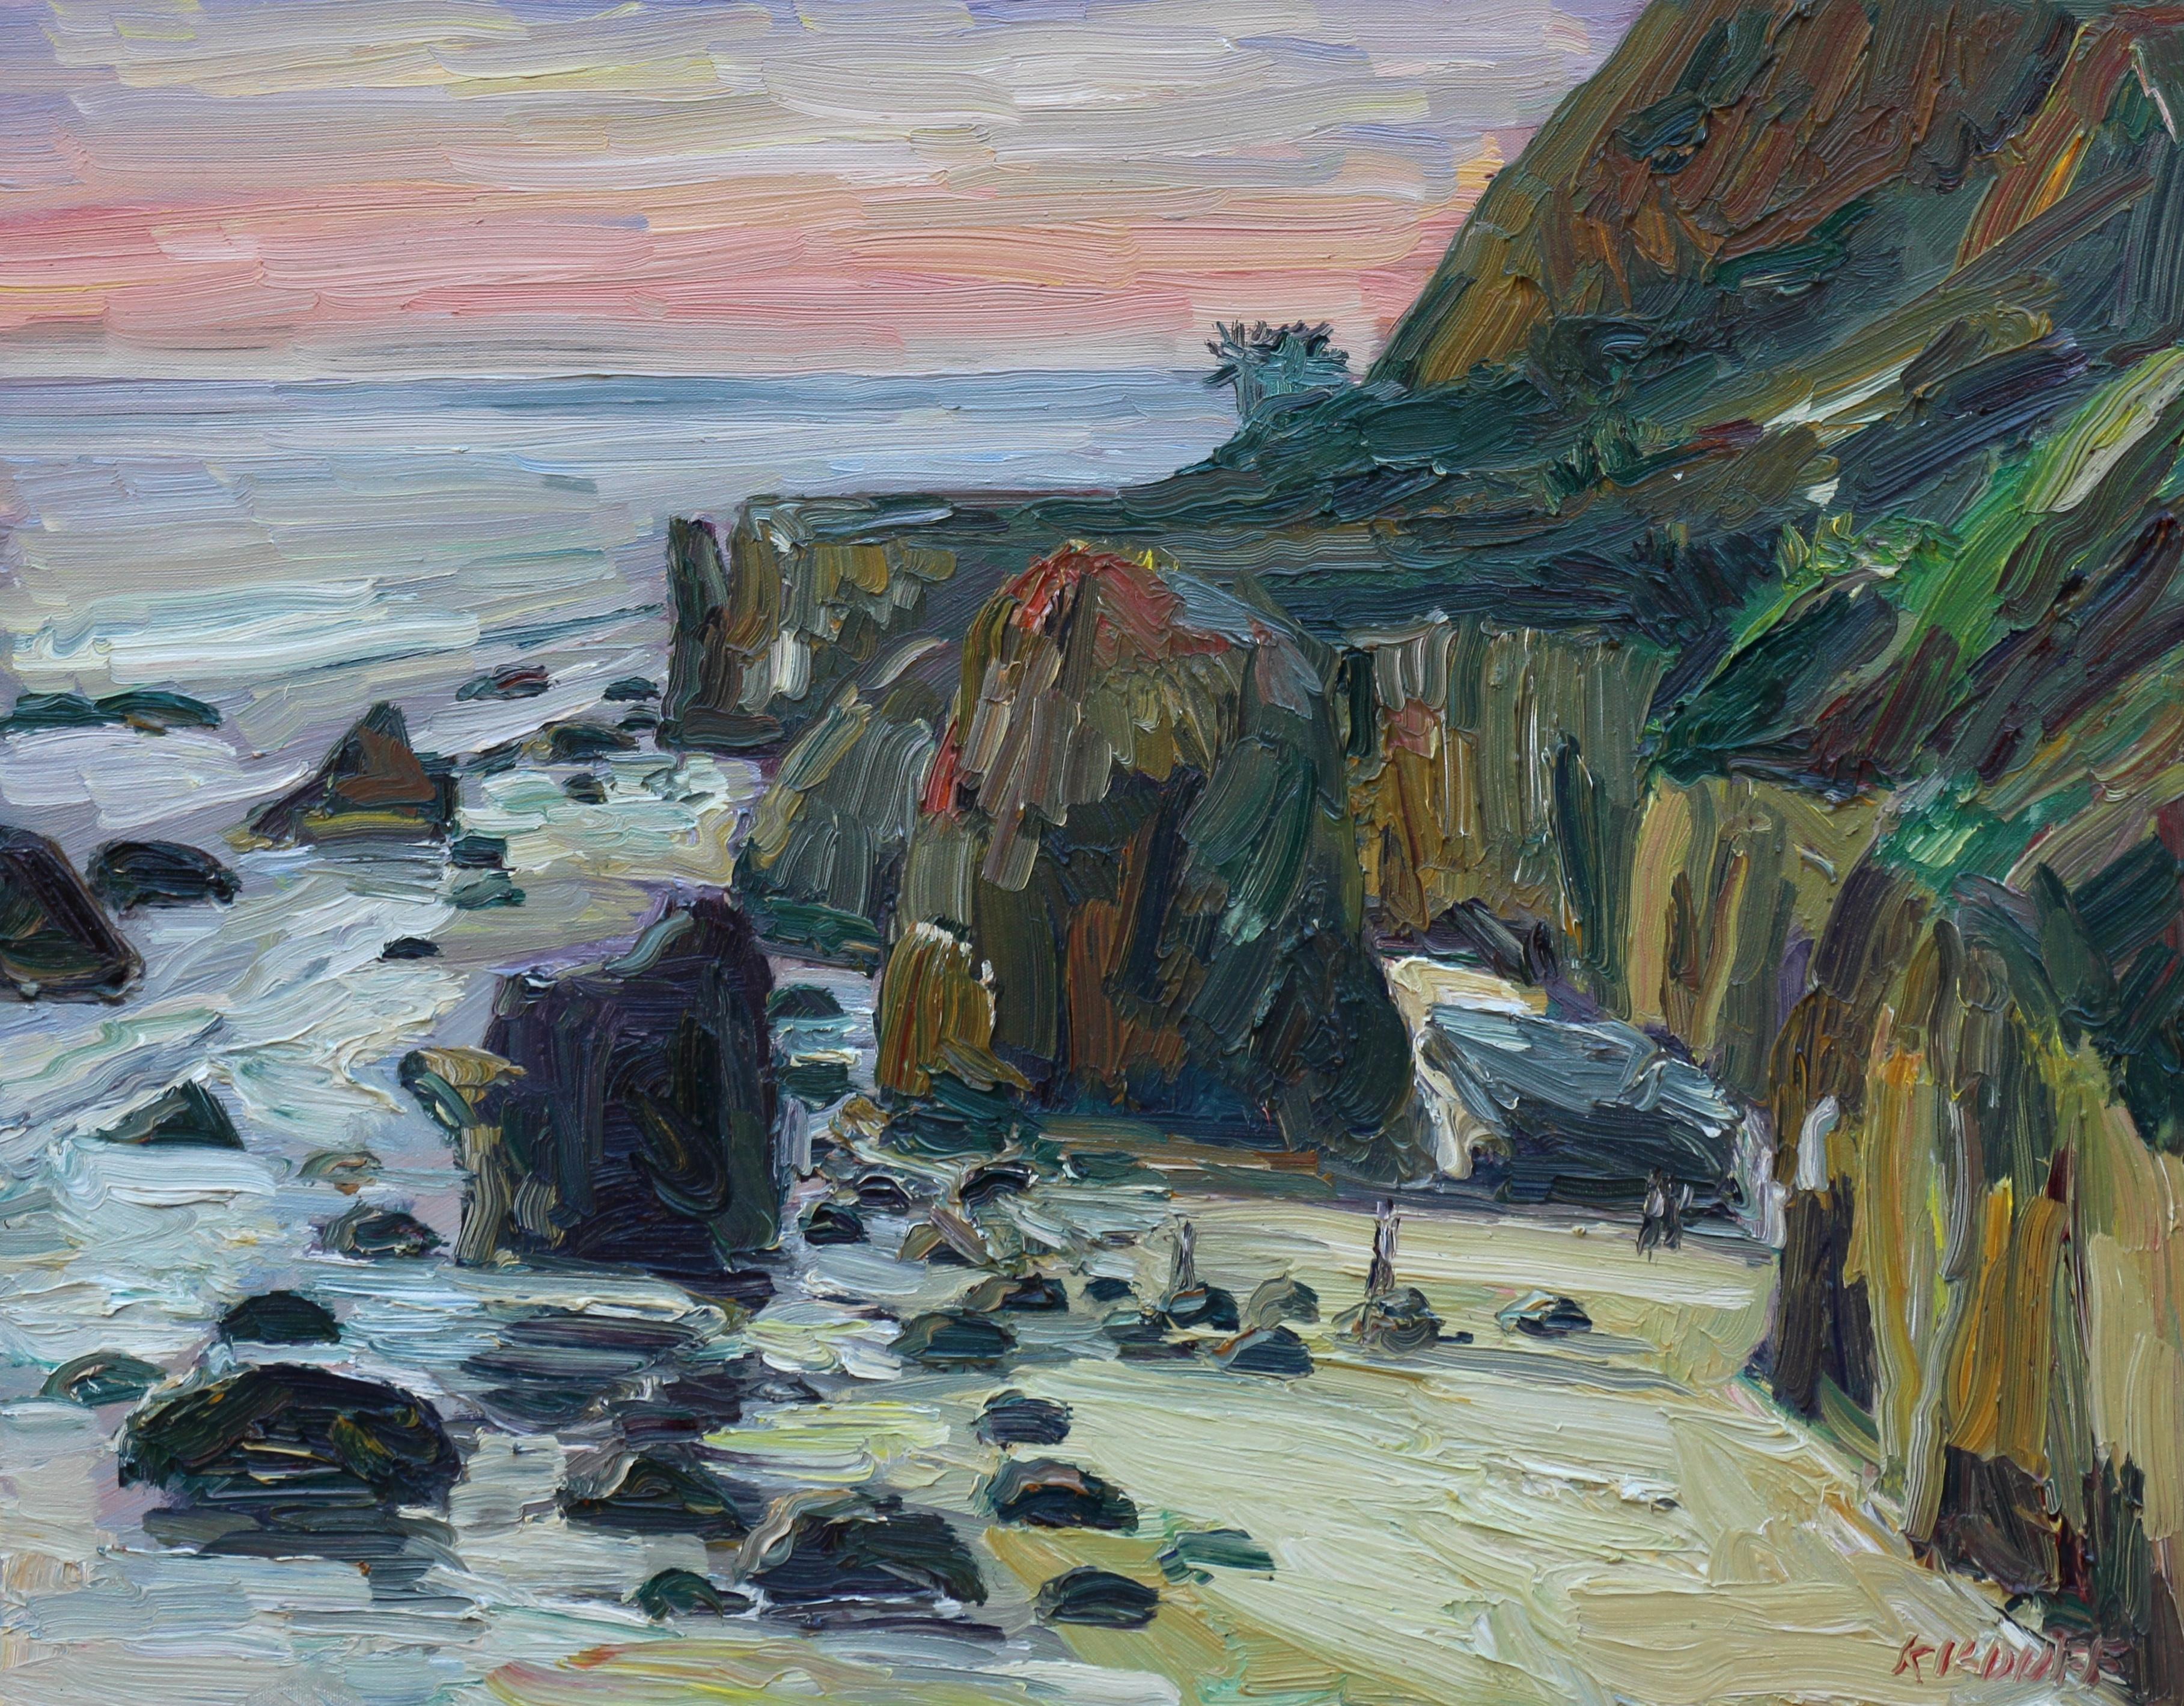 Plein air painting (painted on location) of Matador Beach in Malibu, California. This painting was exhibited at my show titled "The Joy of Multitasking" at Tucson MOCA in 2017. :: Painting :: Impressionist :: This piece comes with an official